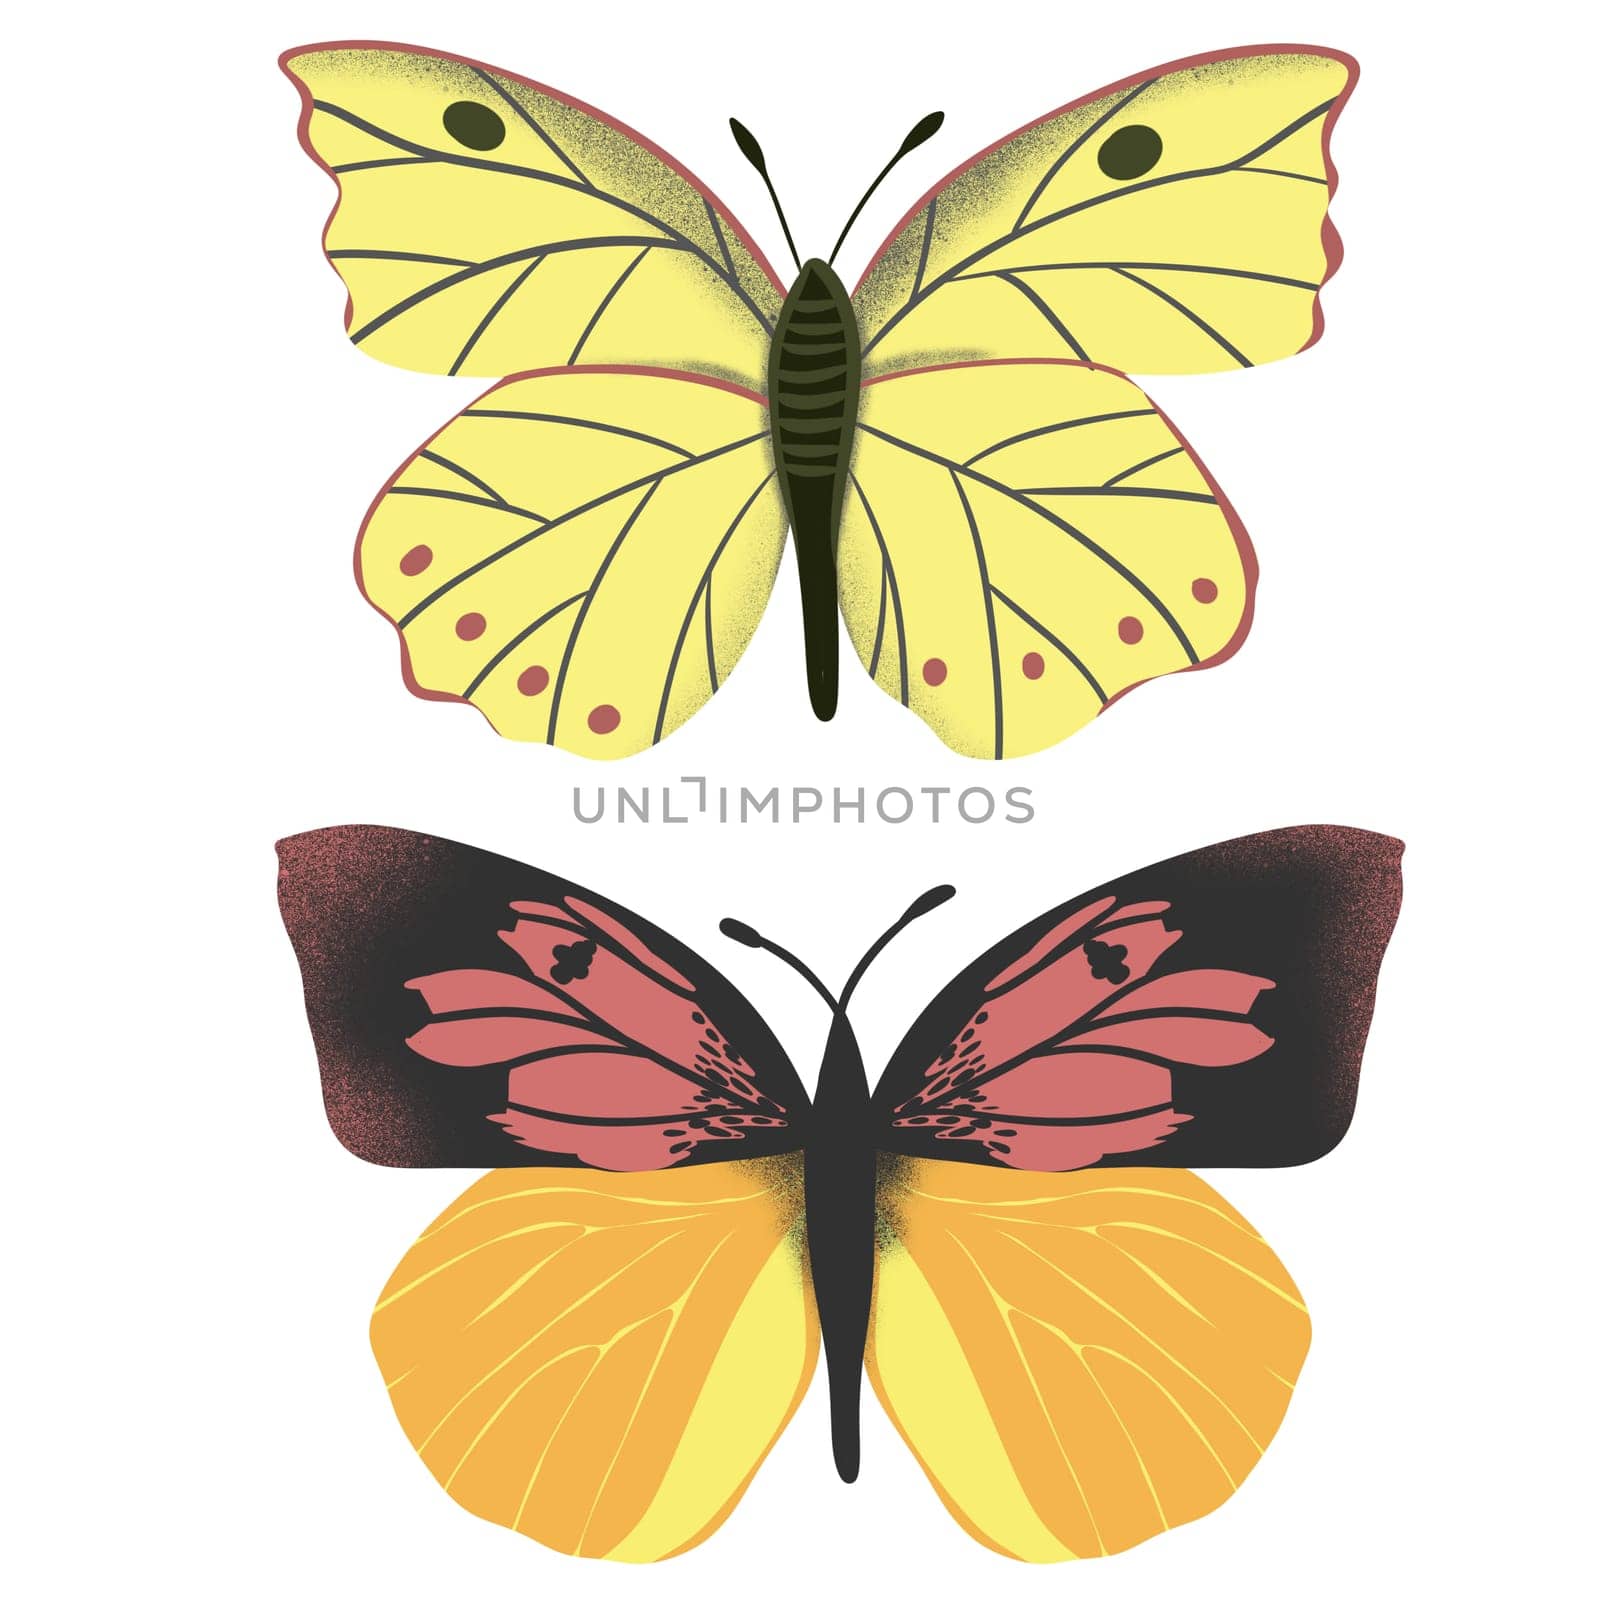 Hand drawn illustration of california dogface butterfly Zerene eurydice, state insect symbol. Biology zoology bug concept, natural meadow forest decor, yellow orange wings with spots, drawing sketch. by Lagmar